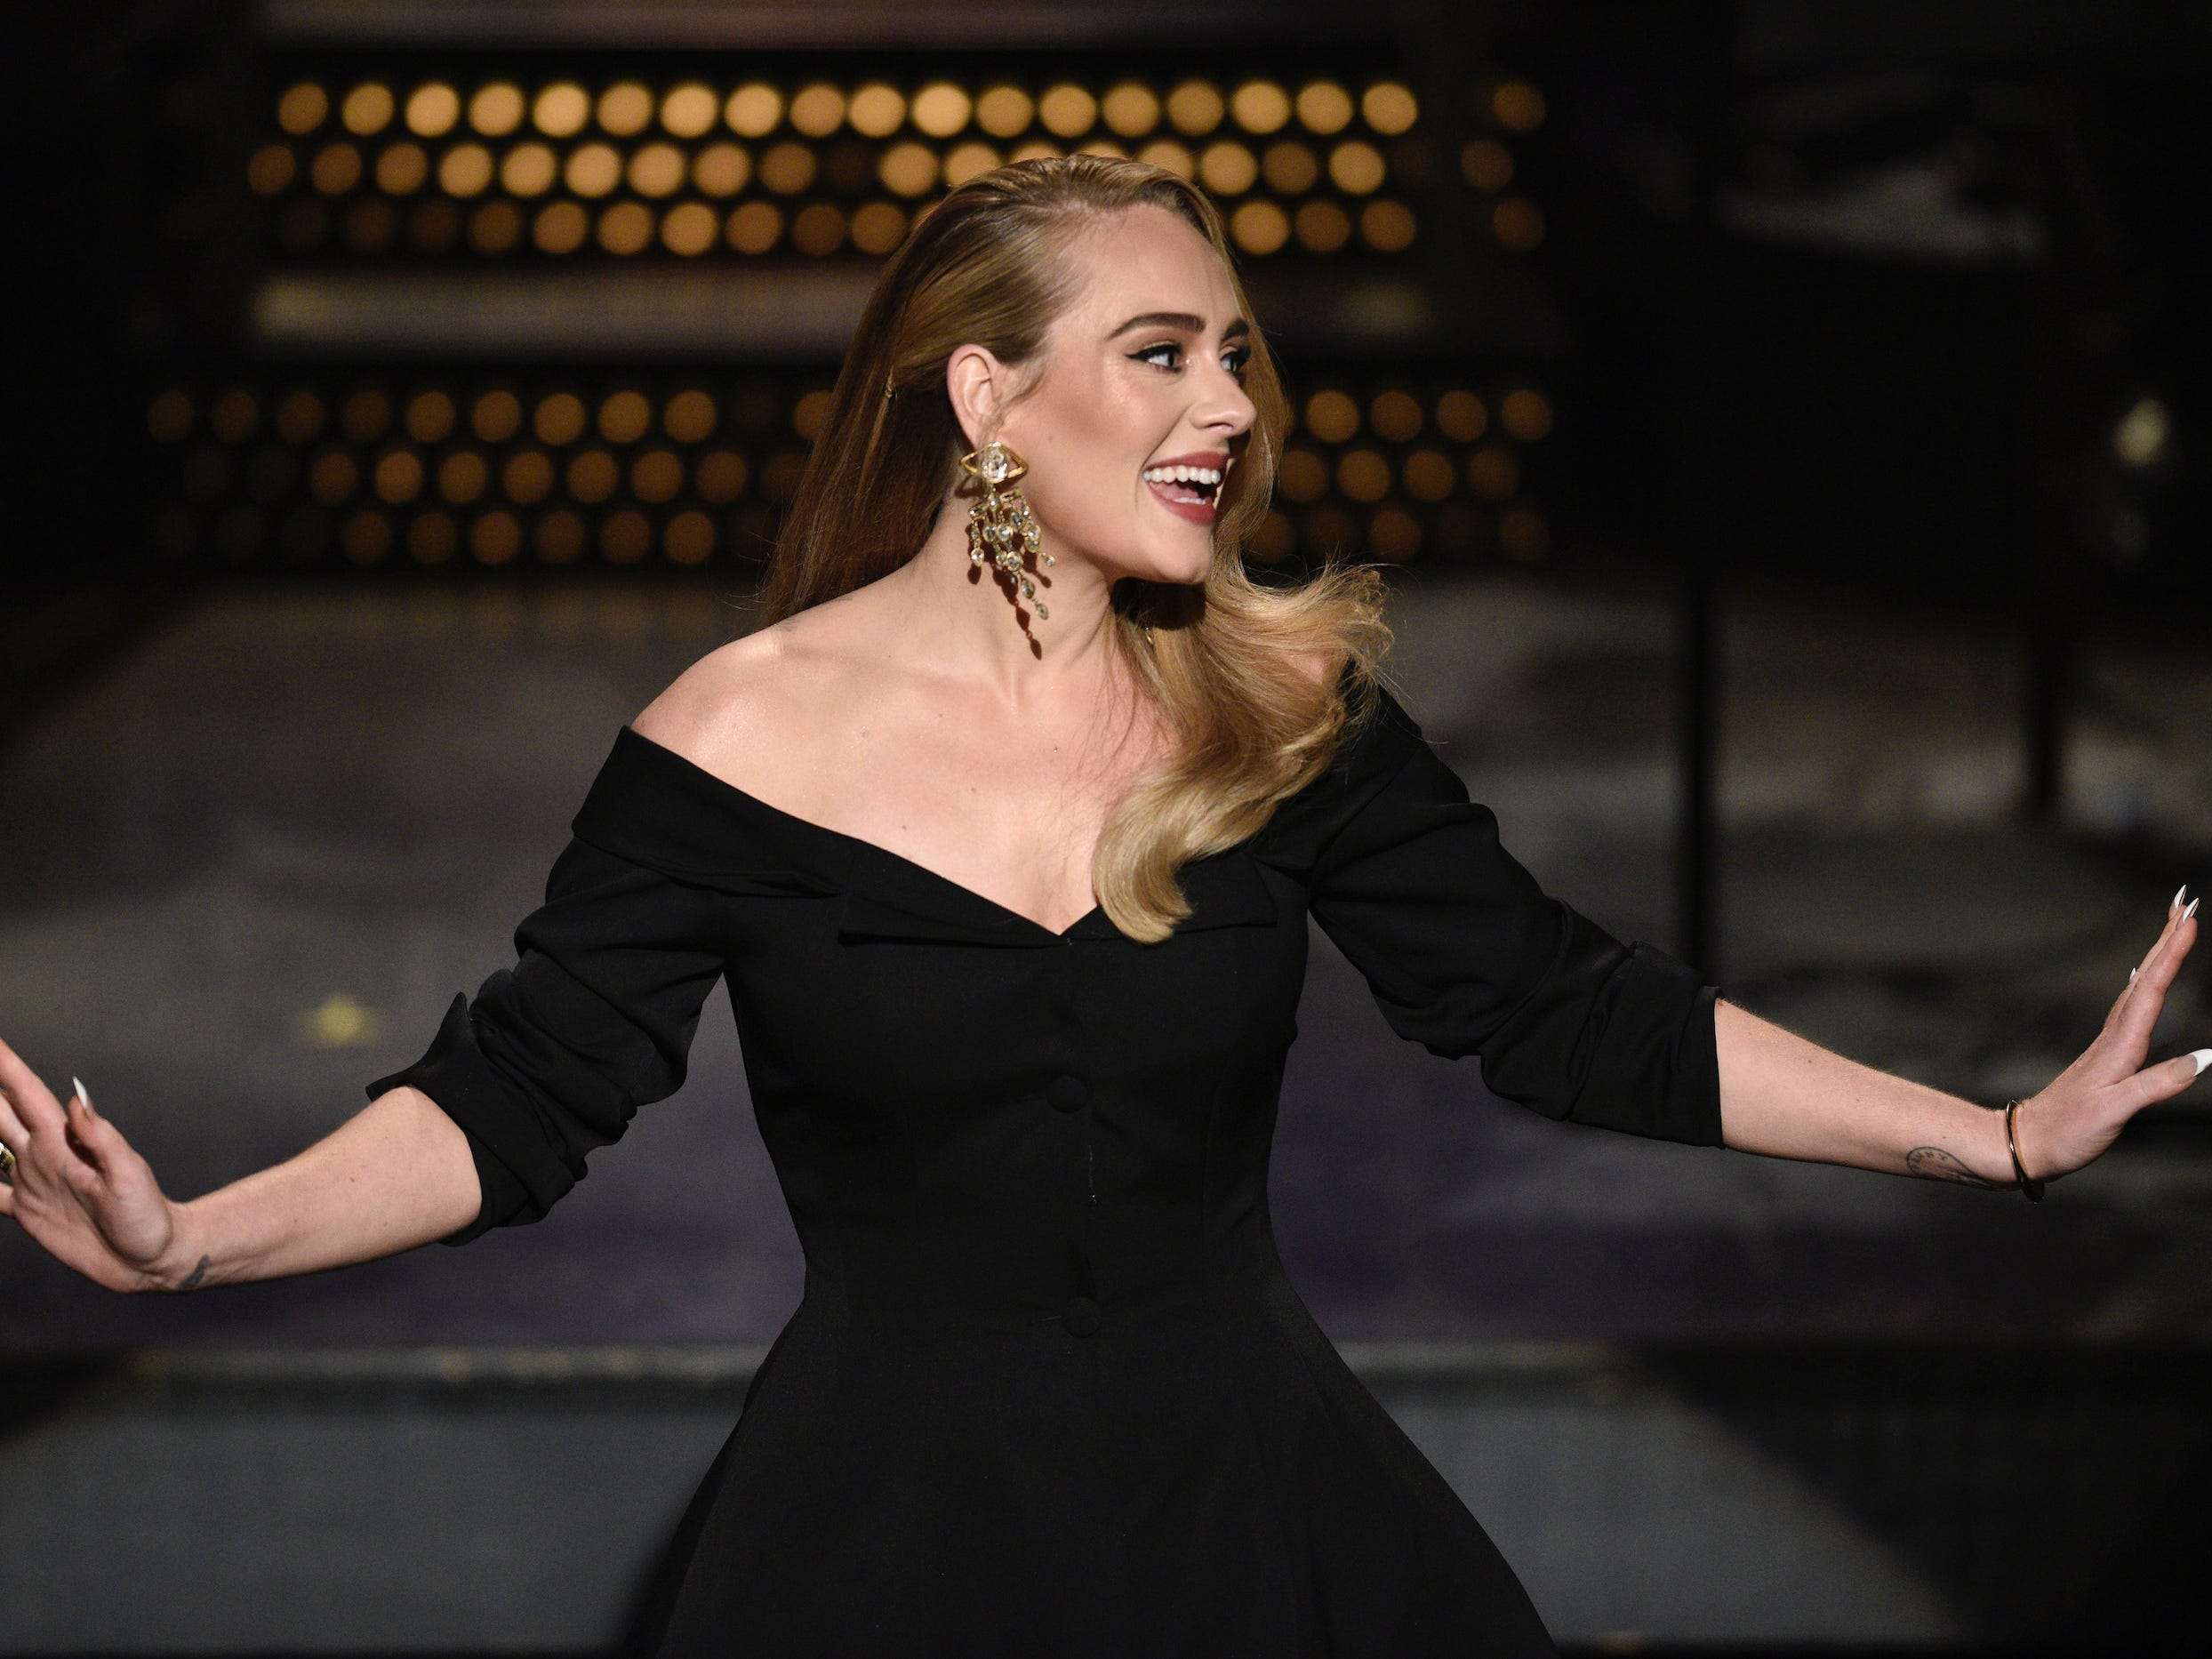 Fans Think Adele 'Looks Unrecognizable' In New Post-Oscars Selfie